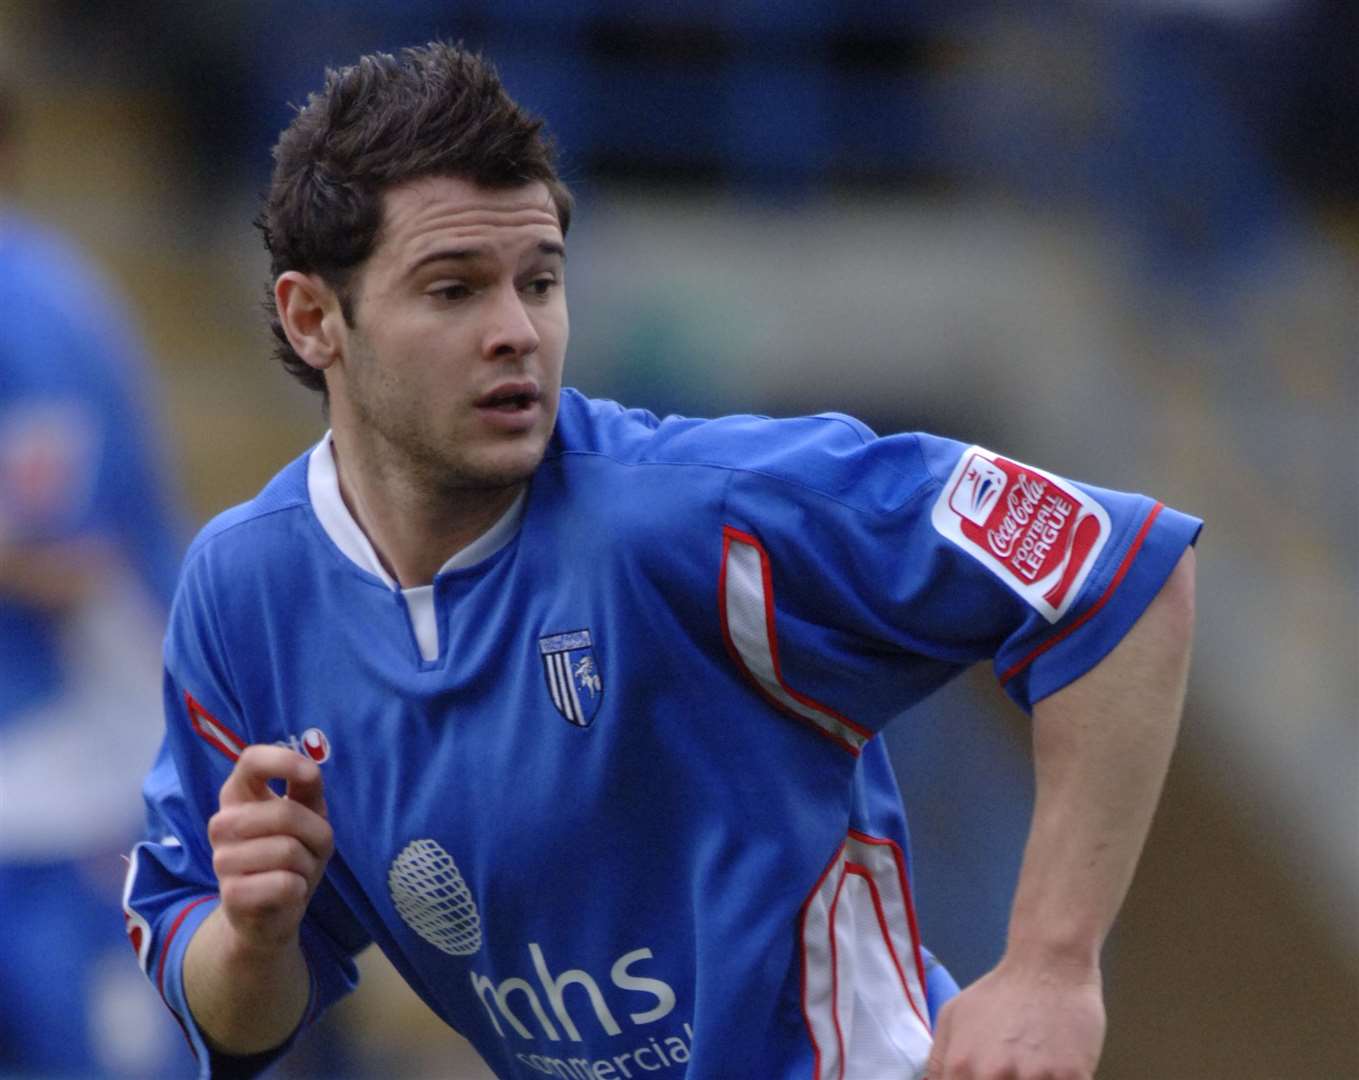 Matt Jarvis played over 100 league games for the Gills